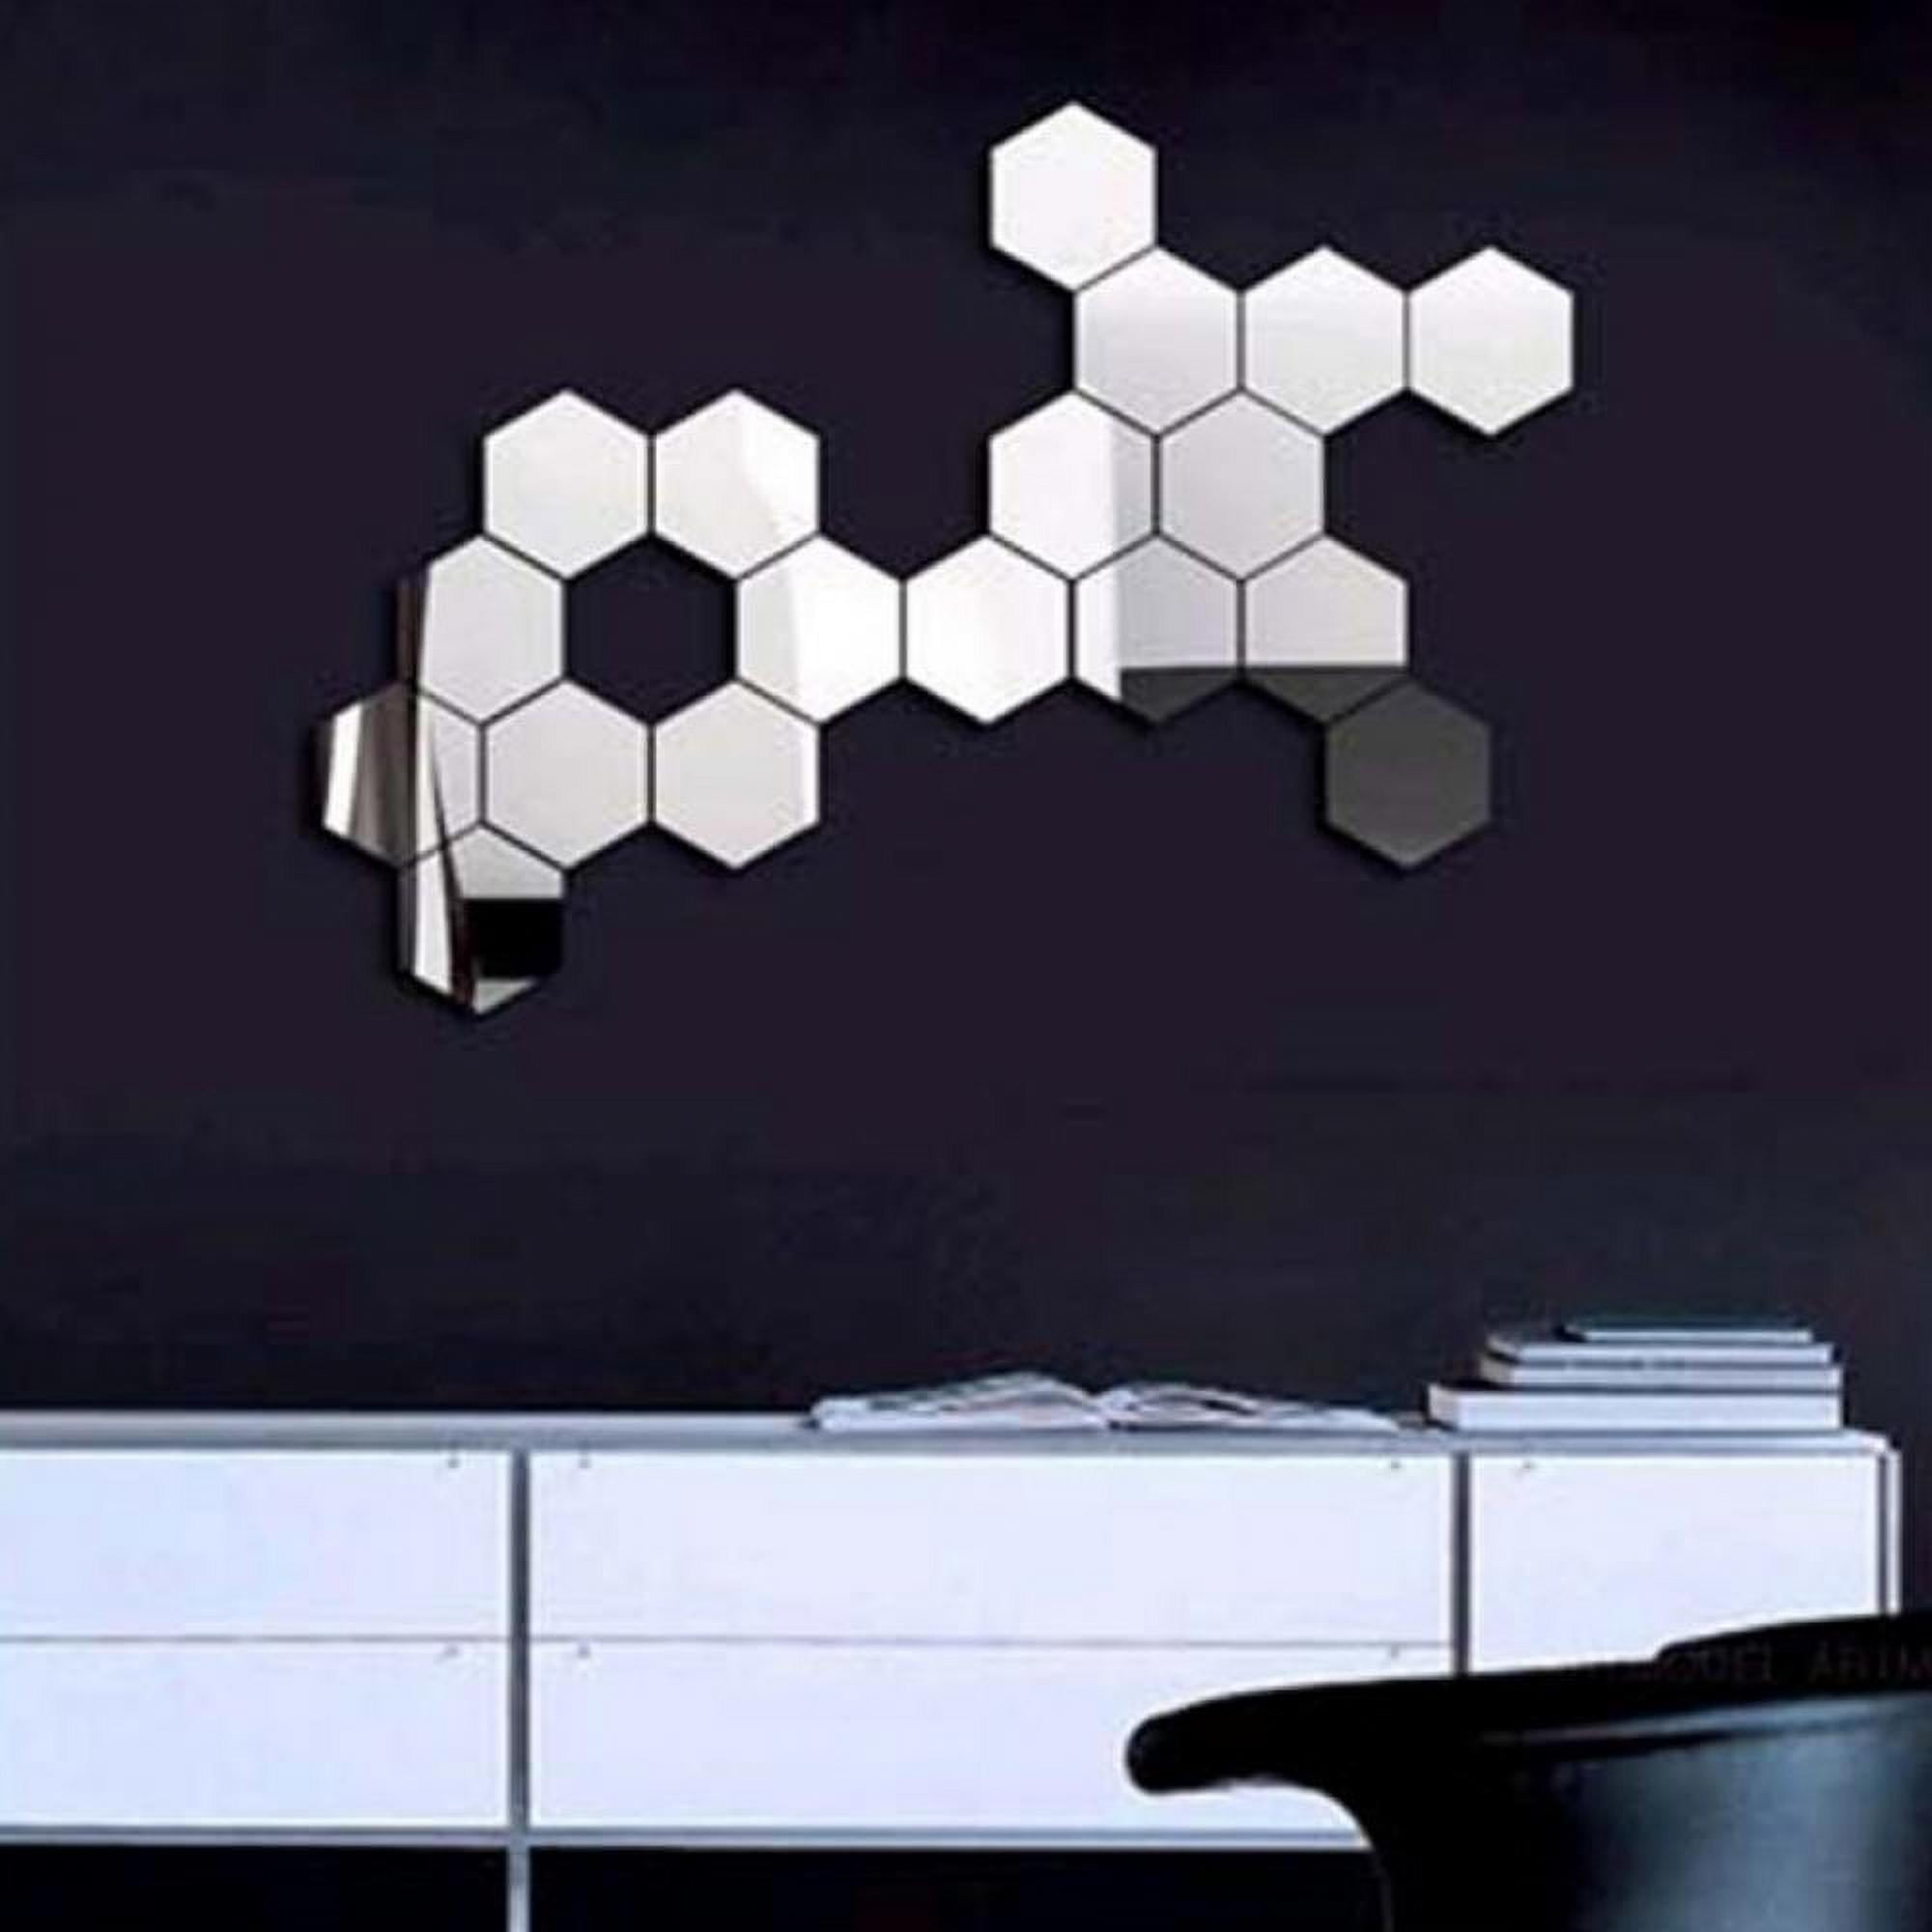 24 Pieces Removable Acrylic Mirror Setting Wall Sticker Decal Honeycomb Mirror for Home Living Room Bedroom Decor (Middle Hexagon, 5 x 4.3 x 2.5